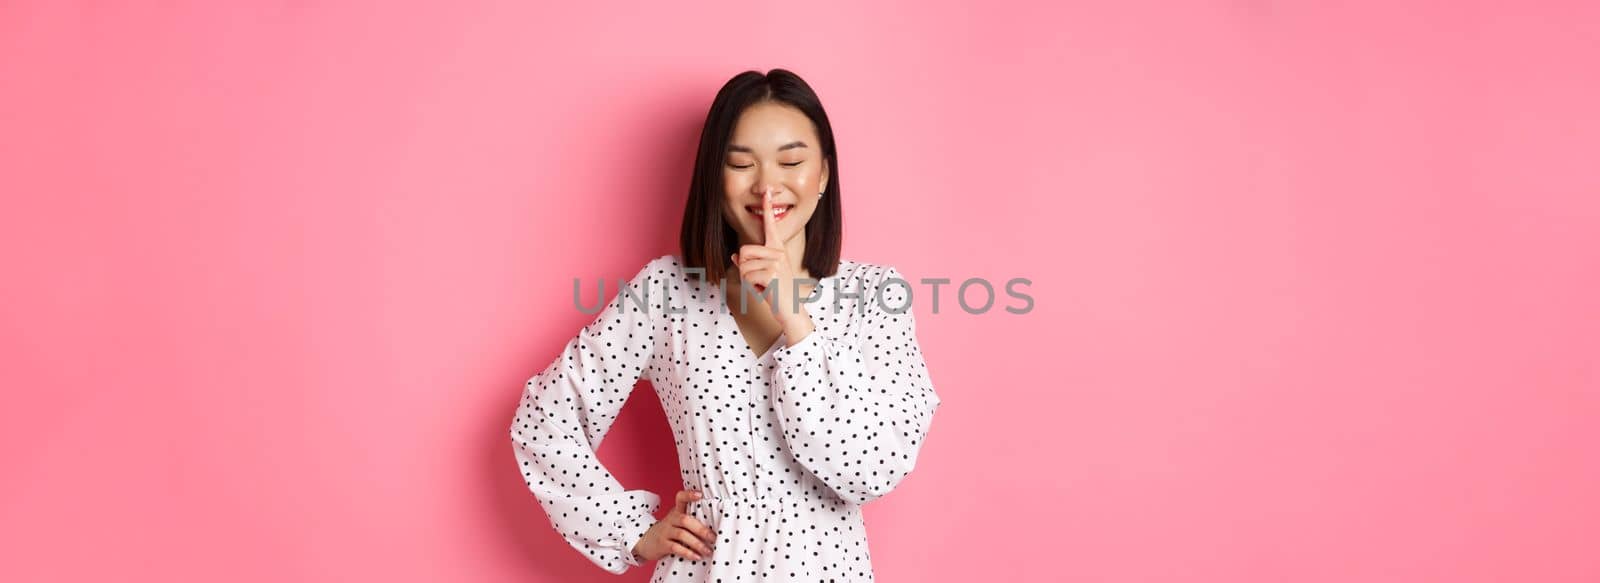 Beautiful Korean woman in trendy dress asking to keep secret, hushing with soft smile and closed eyes, standing over pink background.